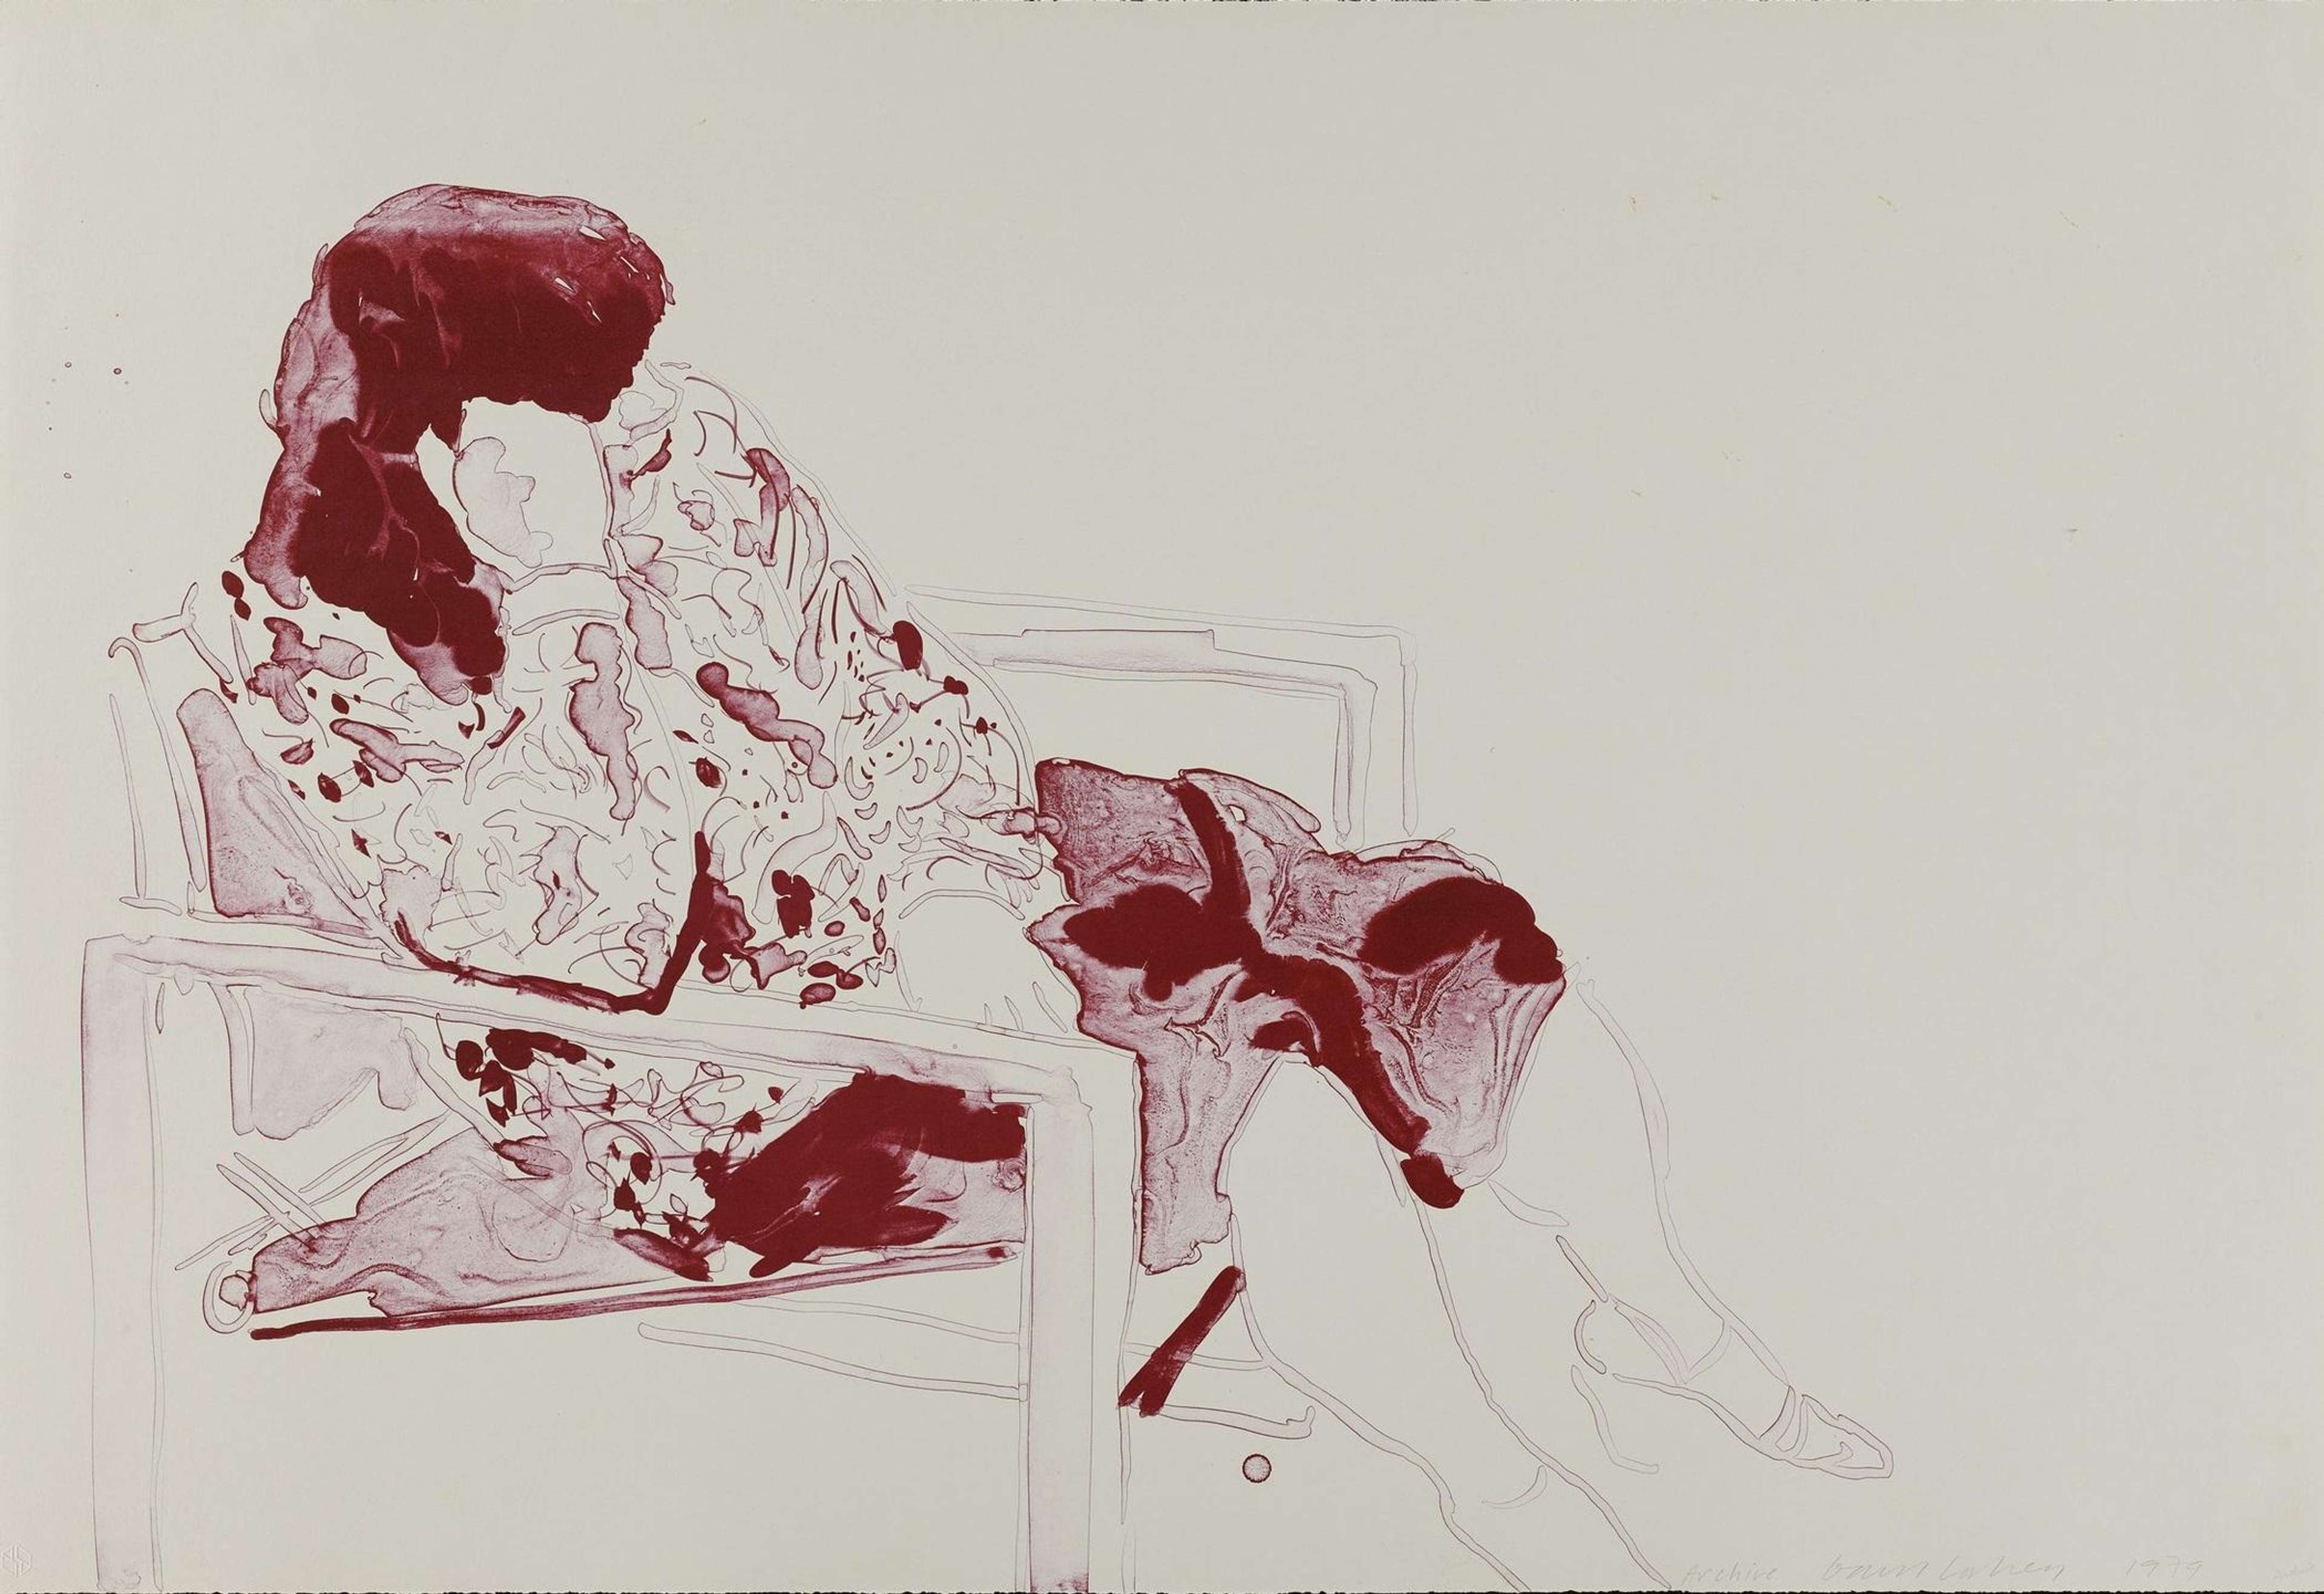 David Hockney’s Ann Seated In Director's Chair. A lithographic print of a woman seated in a chair, coloured with burgundy red ink. 